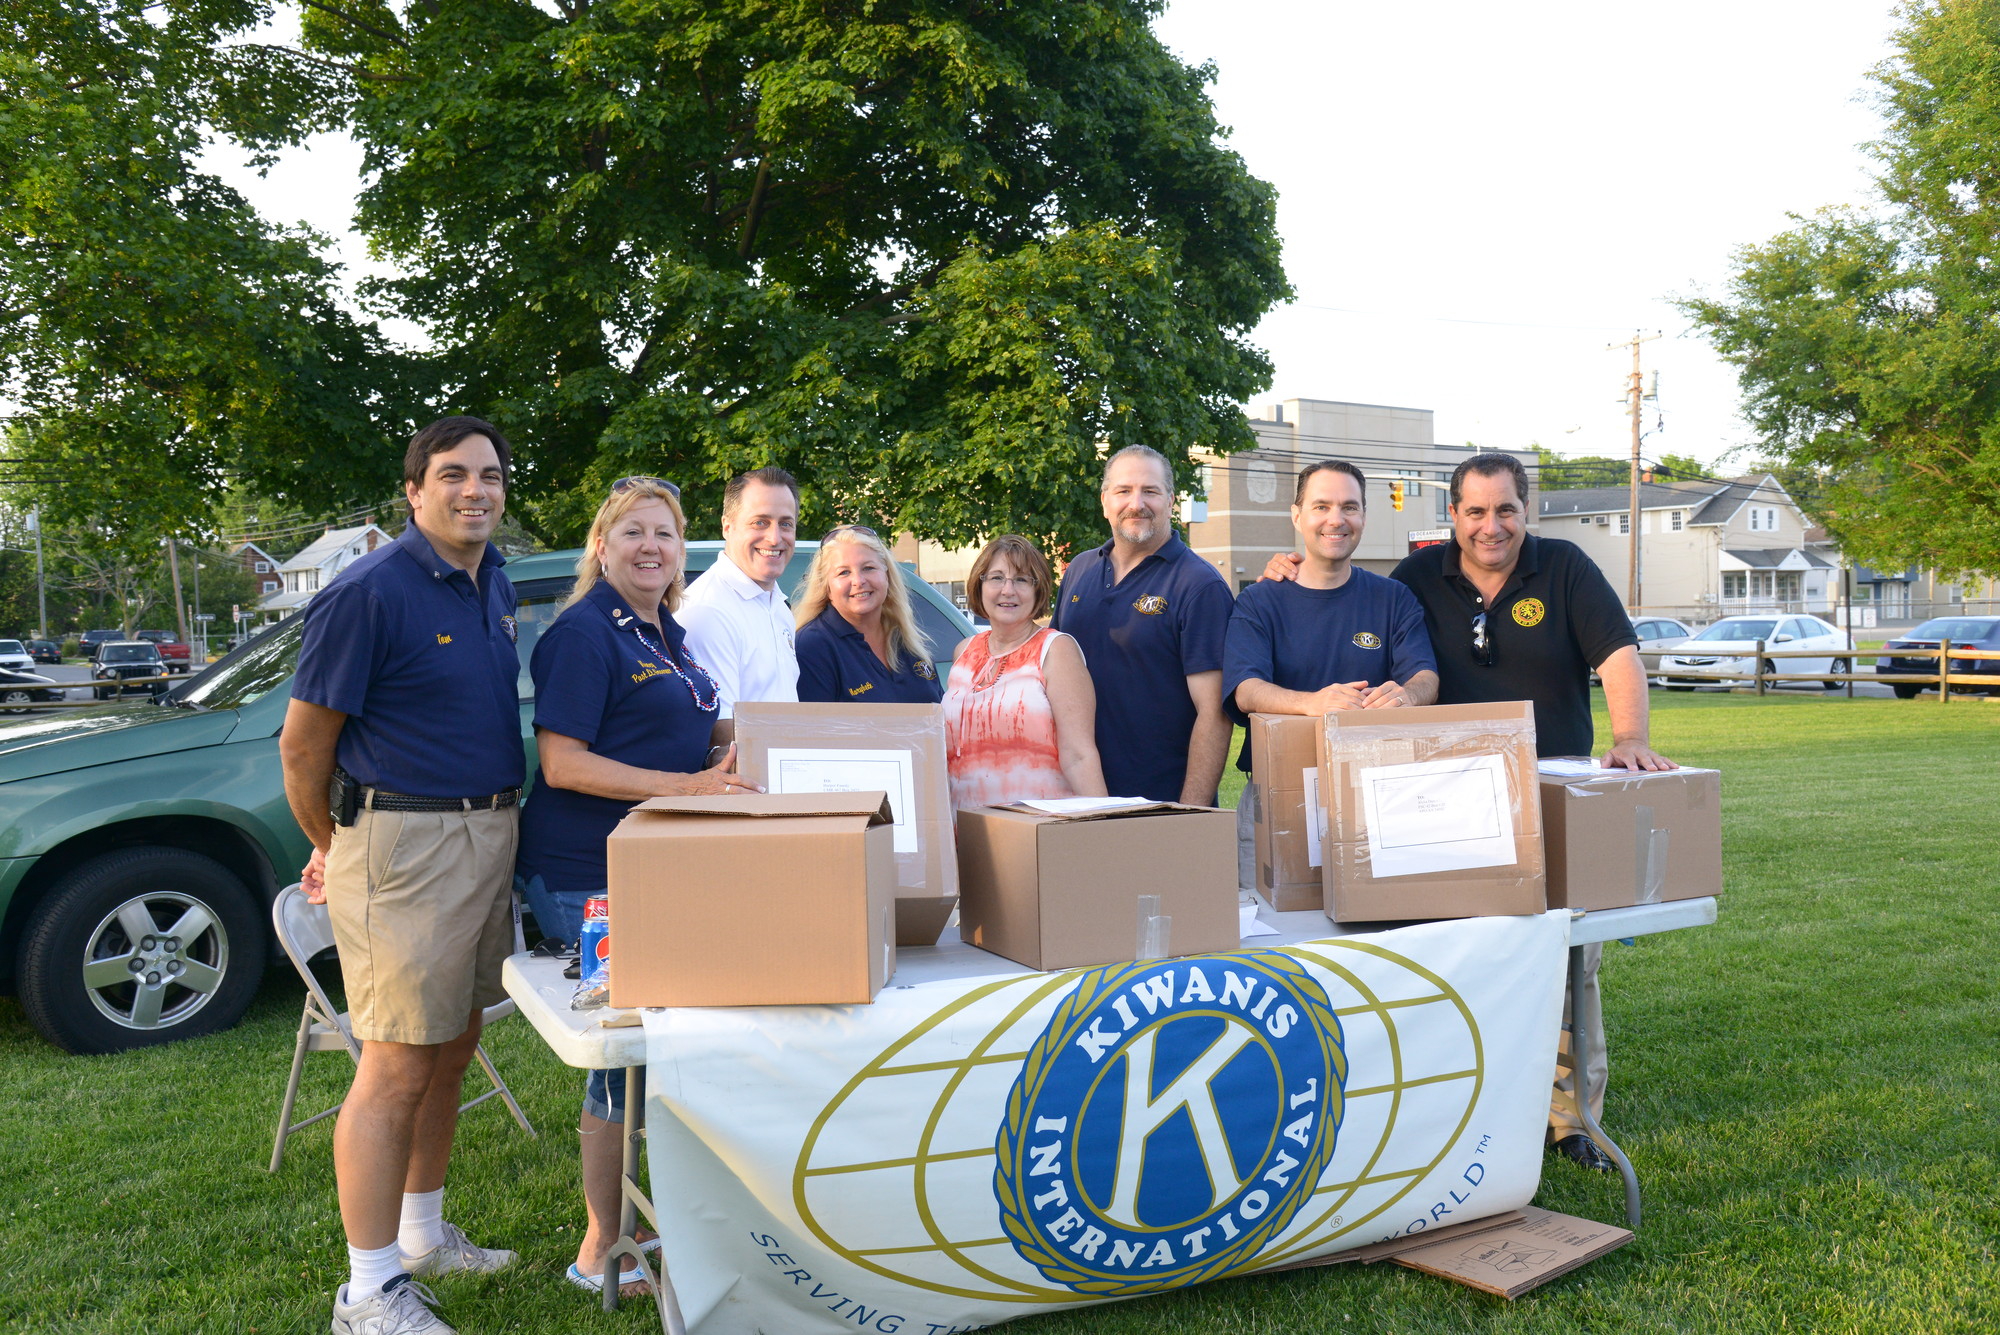 Oceanside Kiwanis President Tom Cesiro, Past Lt. Governor Nancy Baxter, Assemblyman Brian Curran, Marybeth Schmid, Kiwanis Board of Directors member Marylee Scharfberg, Eric Abbey, Kiwanis Vice President Seth Blau, Kiwanis Board of Directors member Michael D’Ambrosio collected books for our overseas troops.